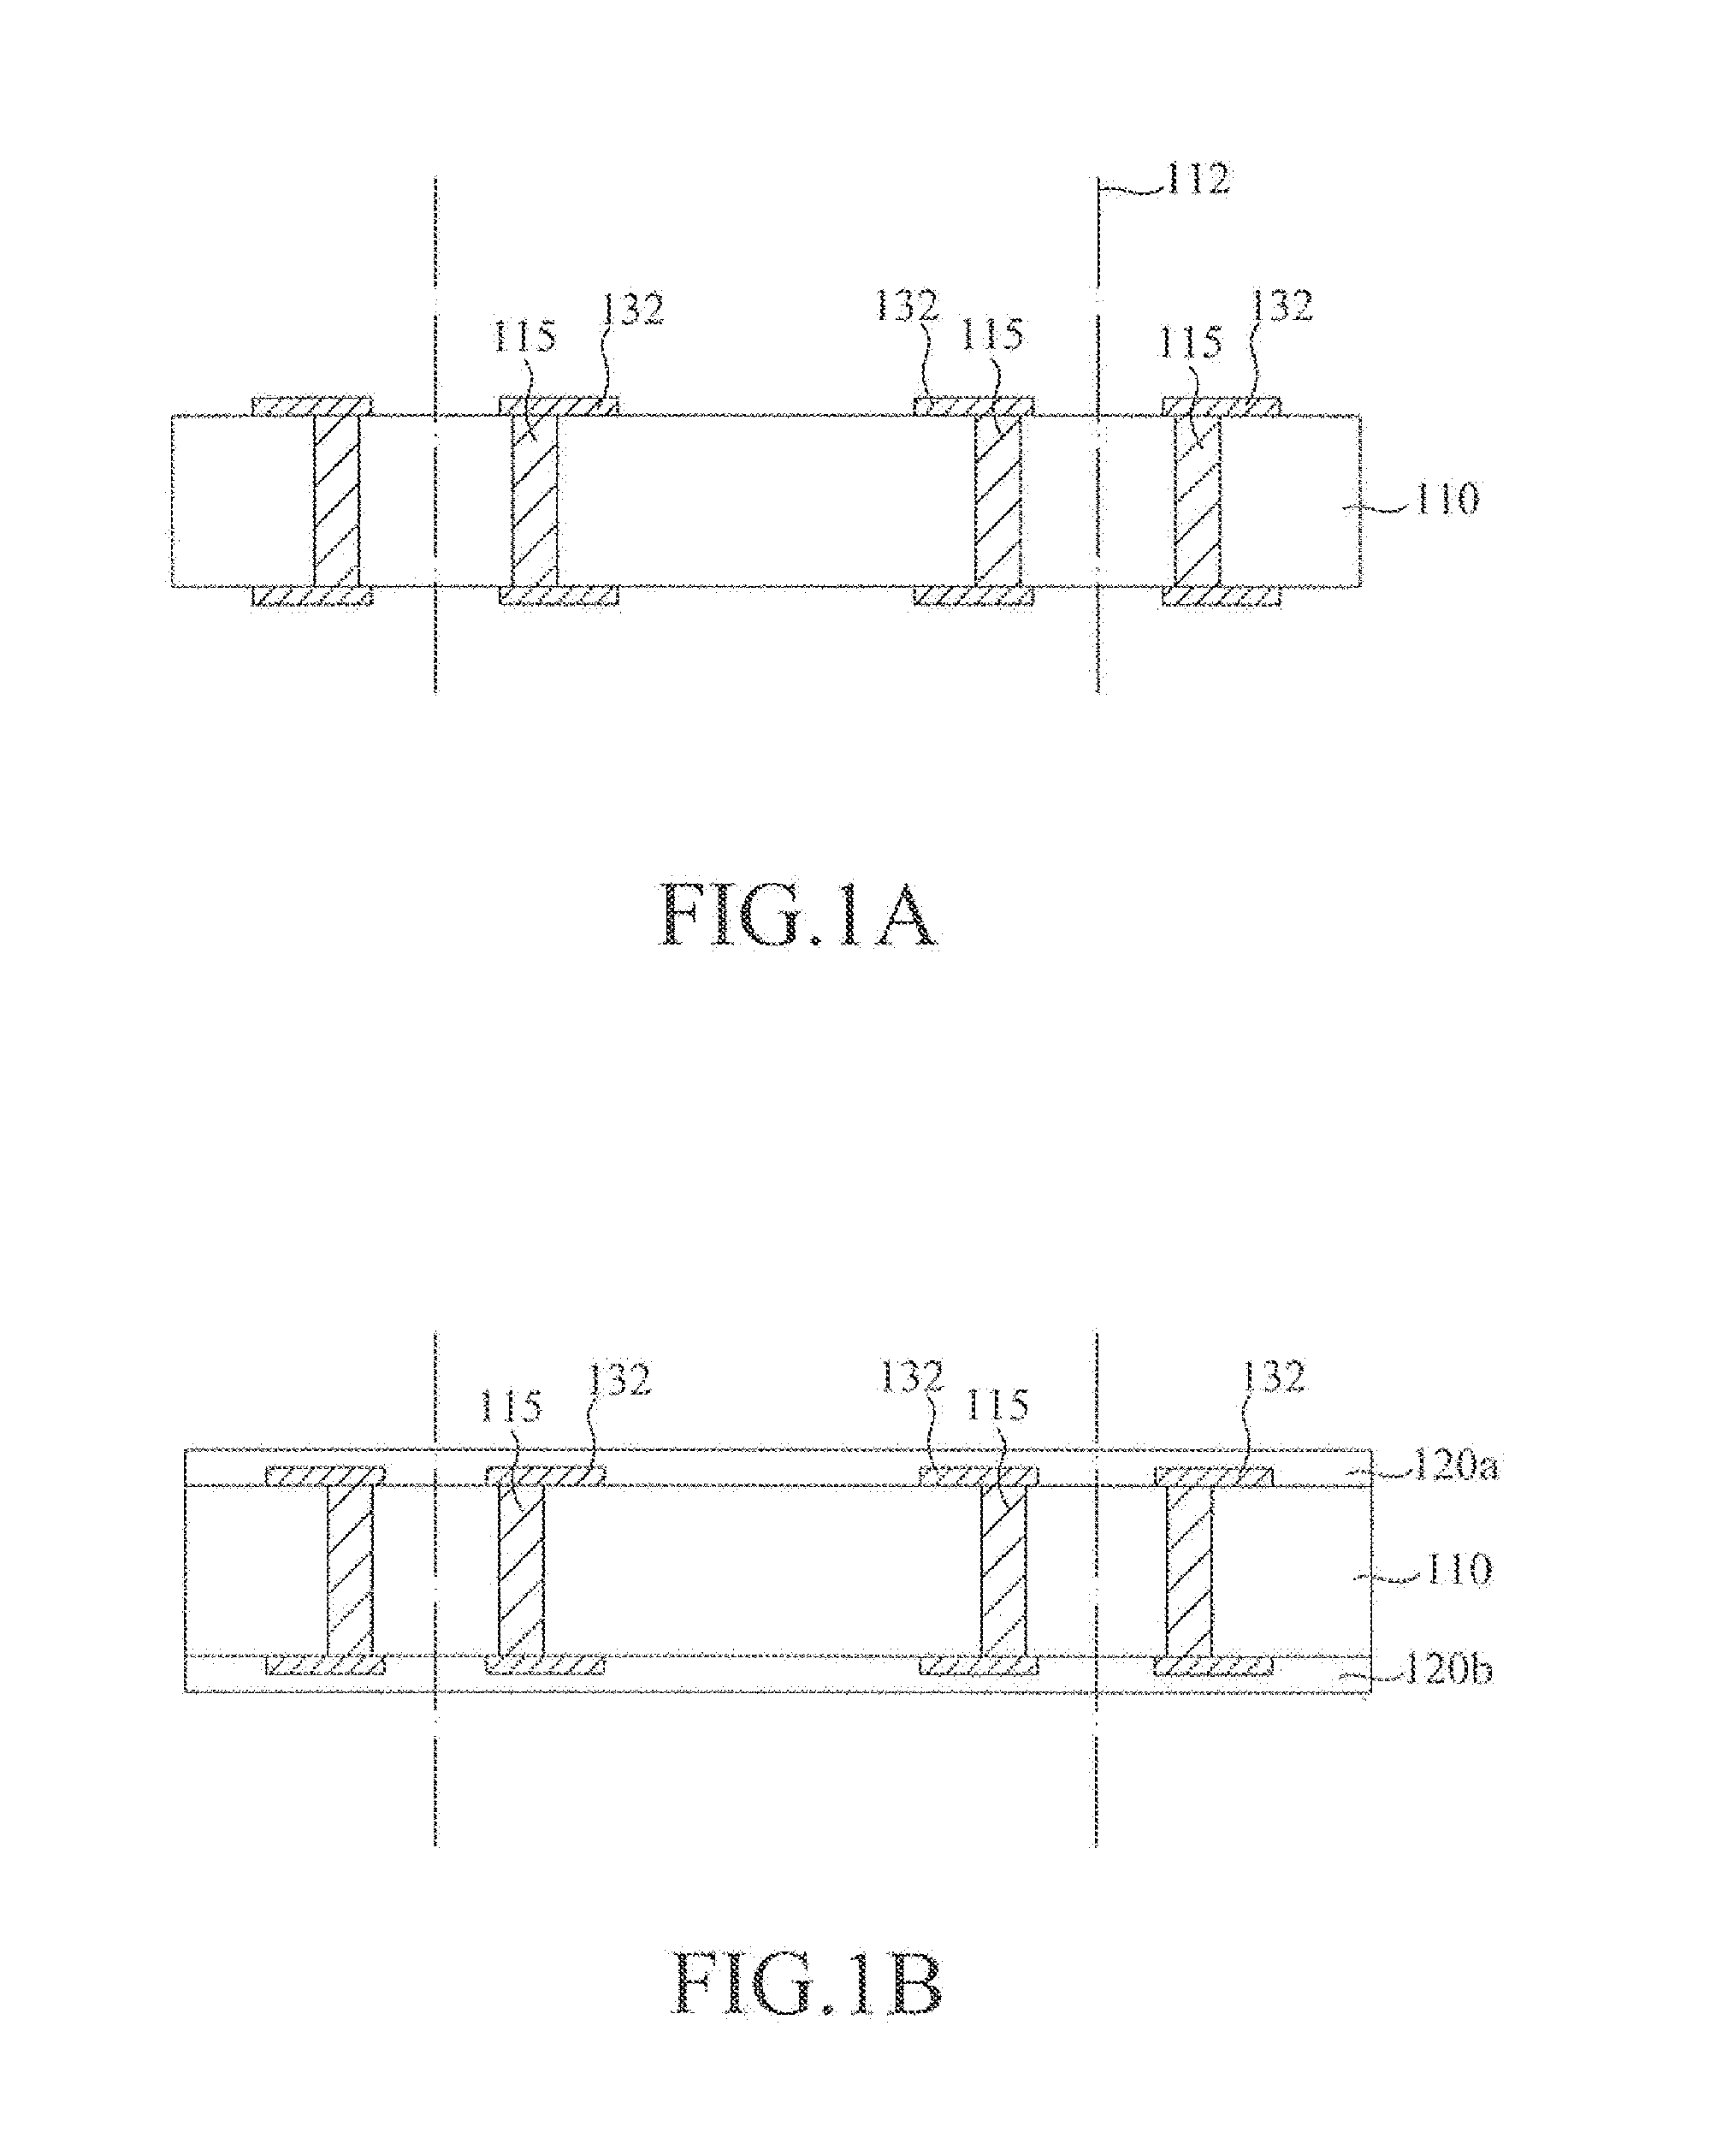 Substrate components for packaging IC chips and electronic device packages of the same